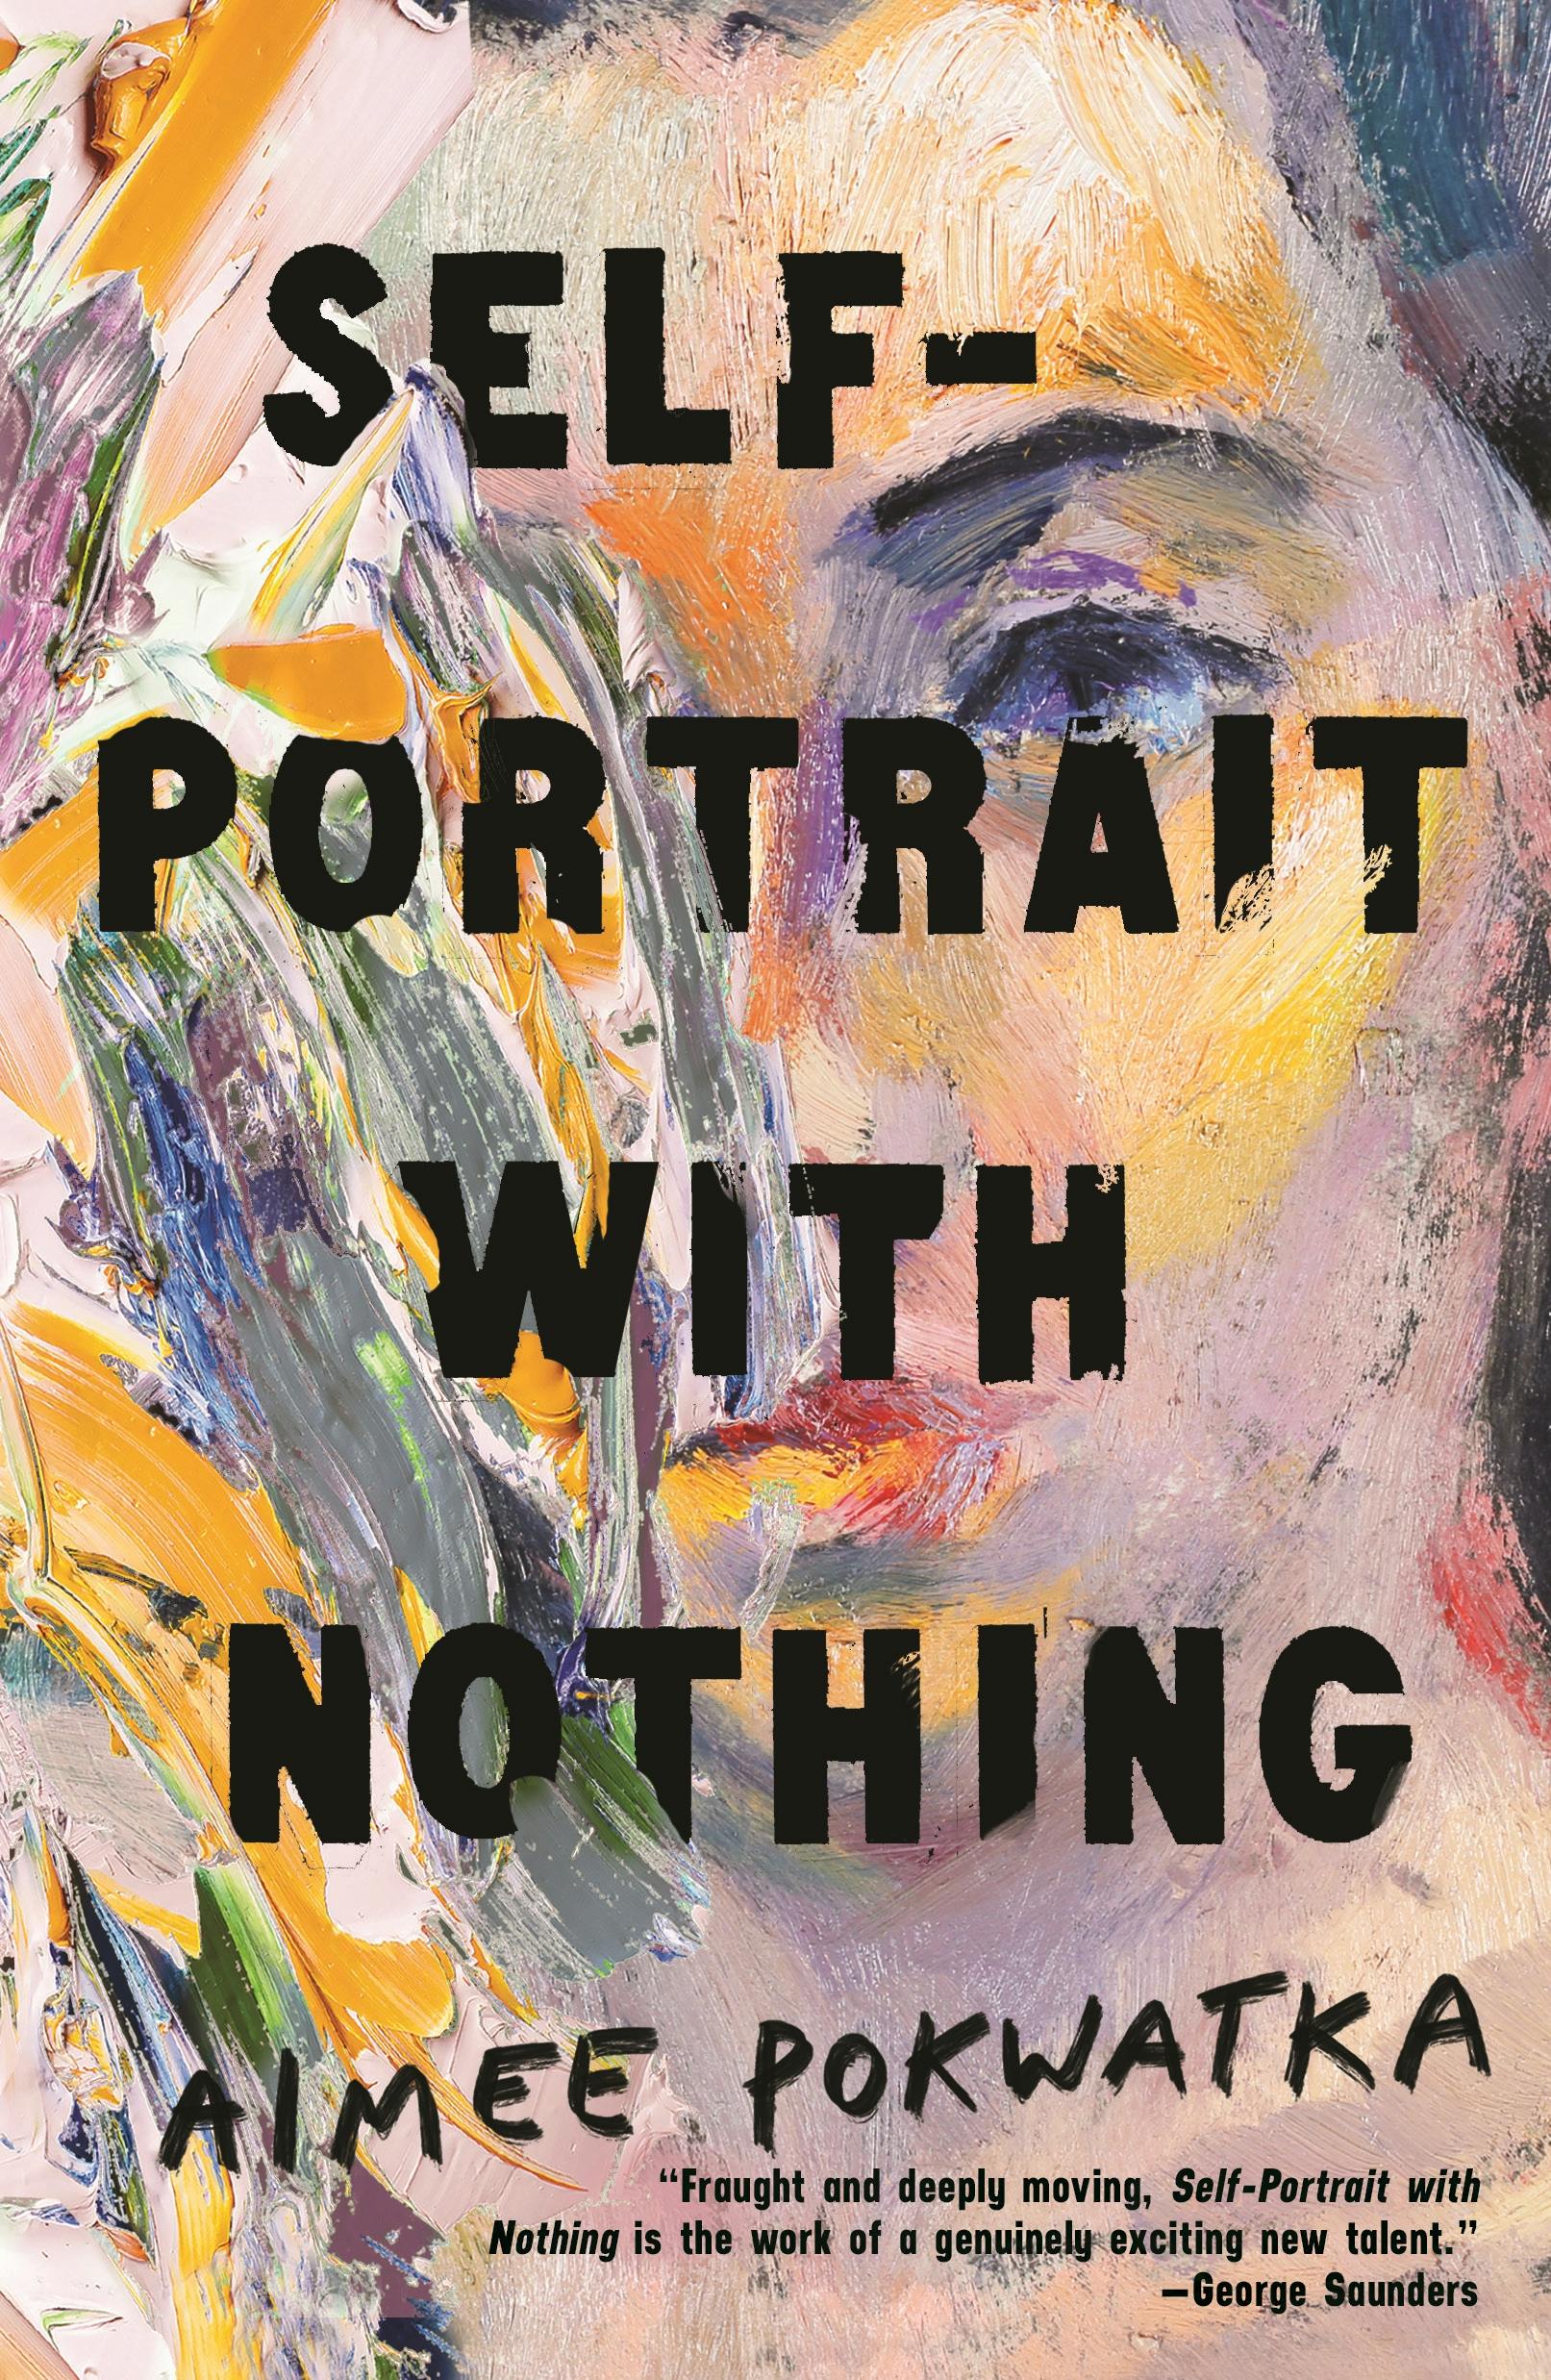 Cover for the book titled as: Self-Portrait with Nothing